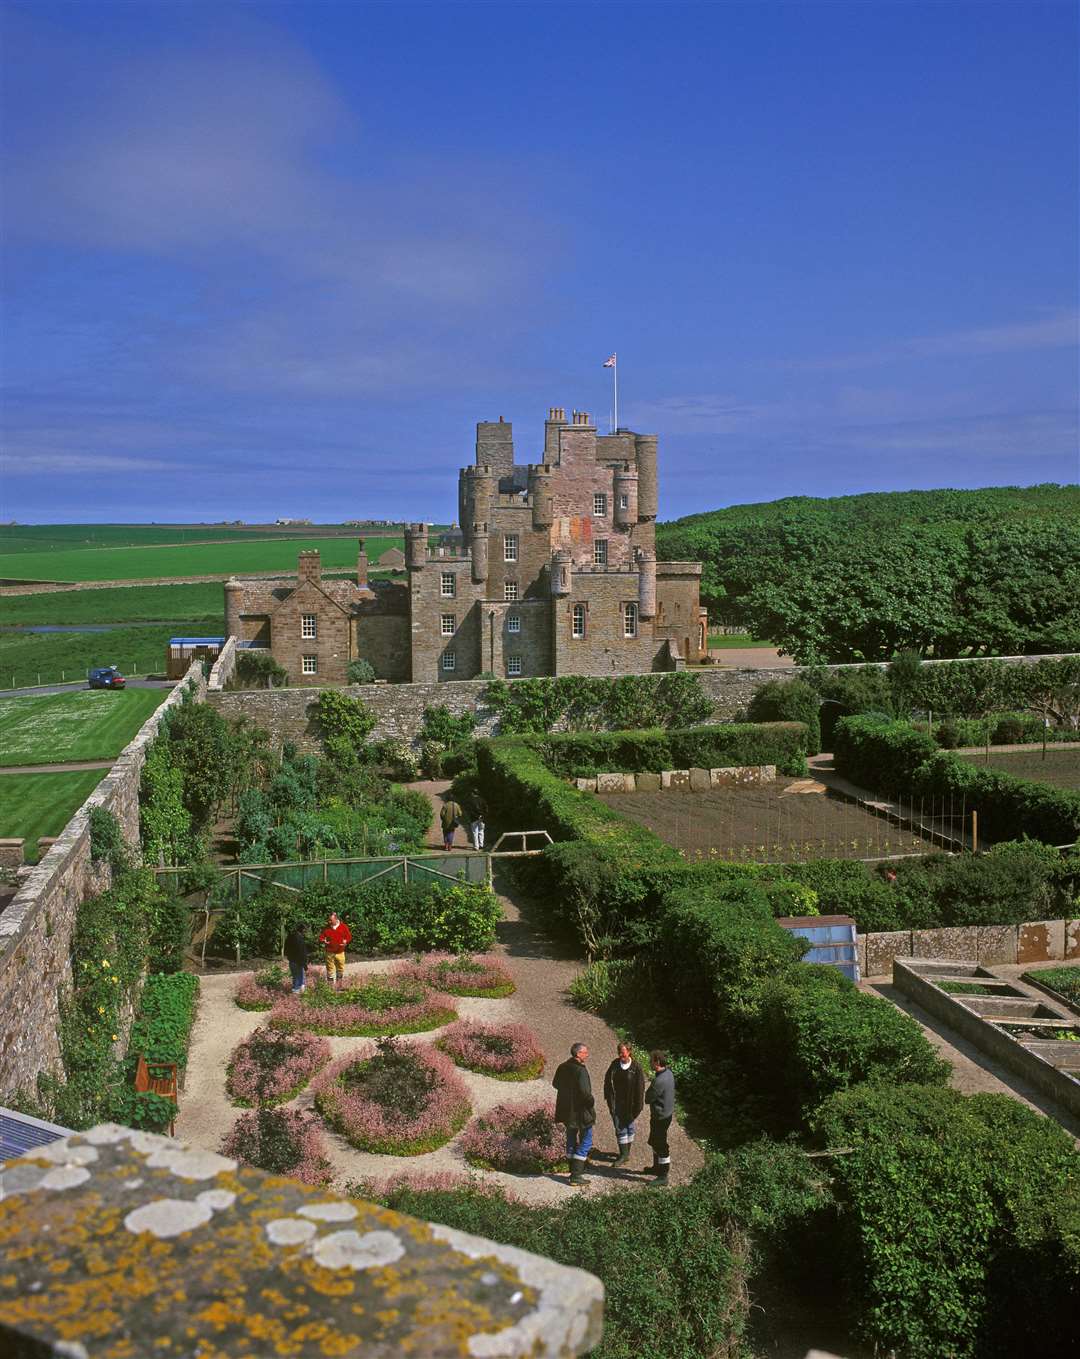 The gardens at Castle of Mey are open July 3 and July 17. Photo: P Tomkins/VisitScotland